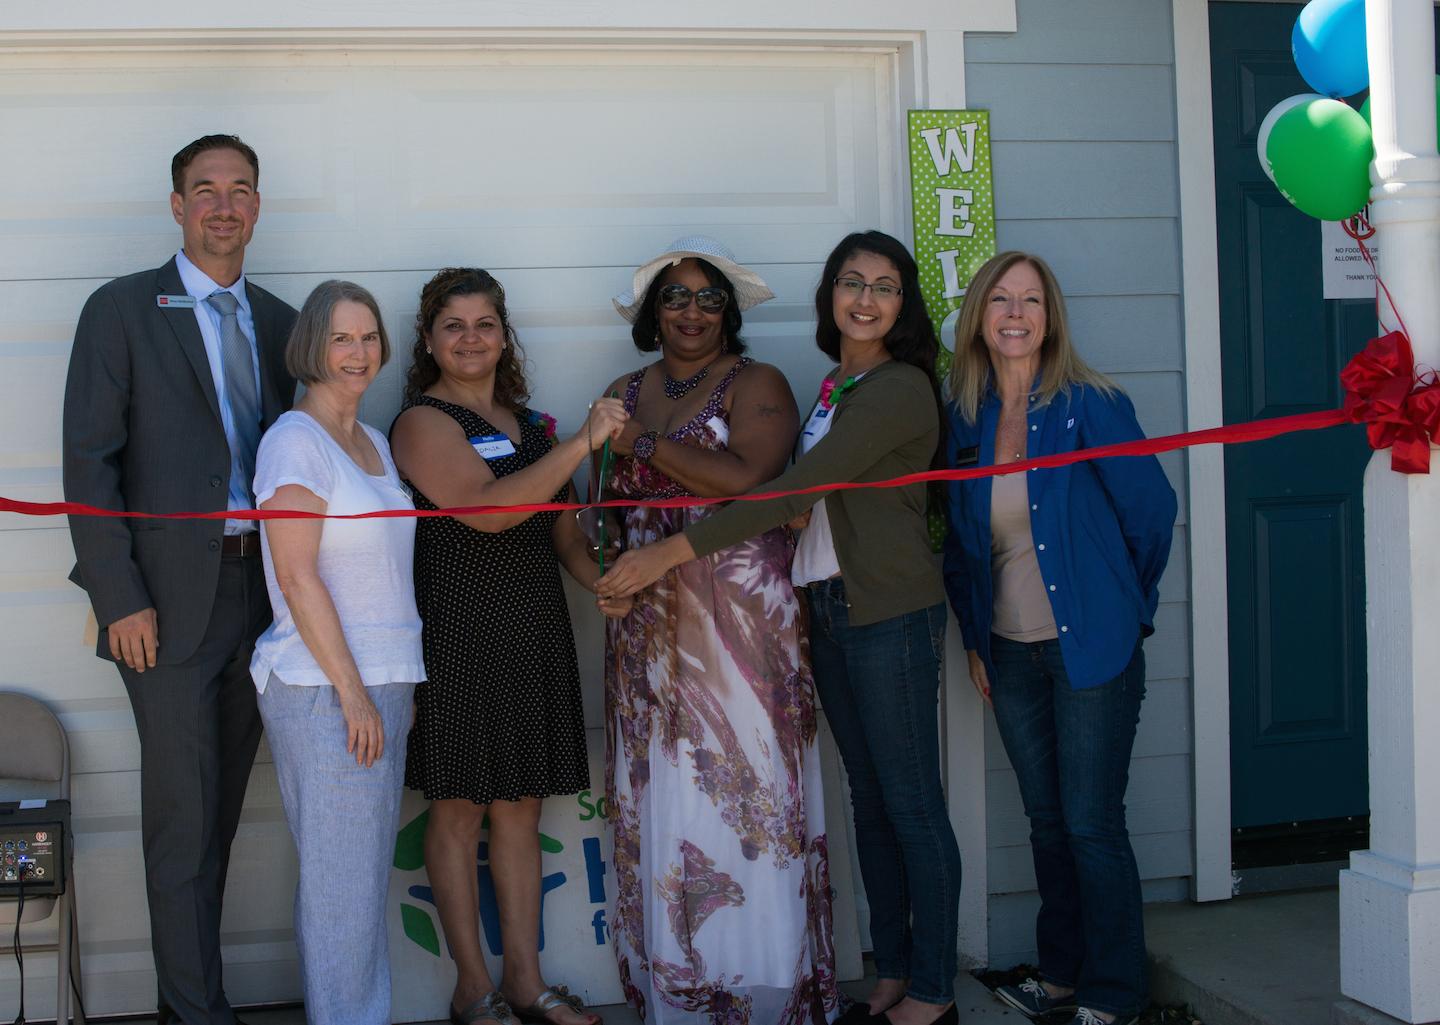 Dedication and ribbon cutting ceremony. Brian Mulholland, District Manager from Wells Fargo (a major sponsor), Ann Cousineau, SNHFH Board President, Homeowners Idalia Gaytan, Briana Kenner, Bella Barron, and Donna Sutherland, VP, Area Manager, Umpqua Bank (sponsor).